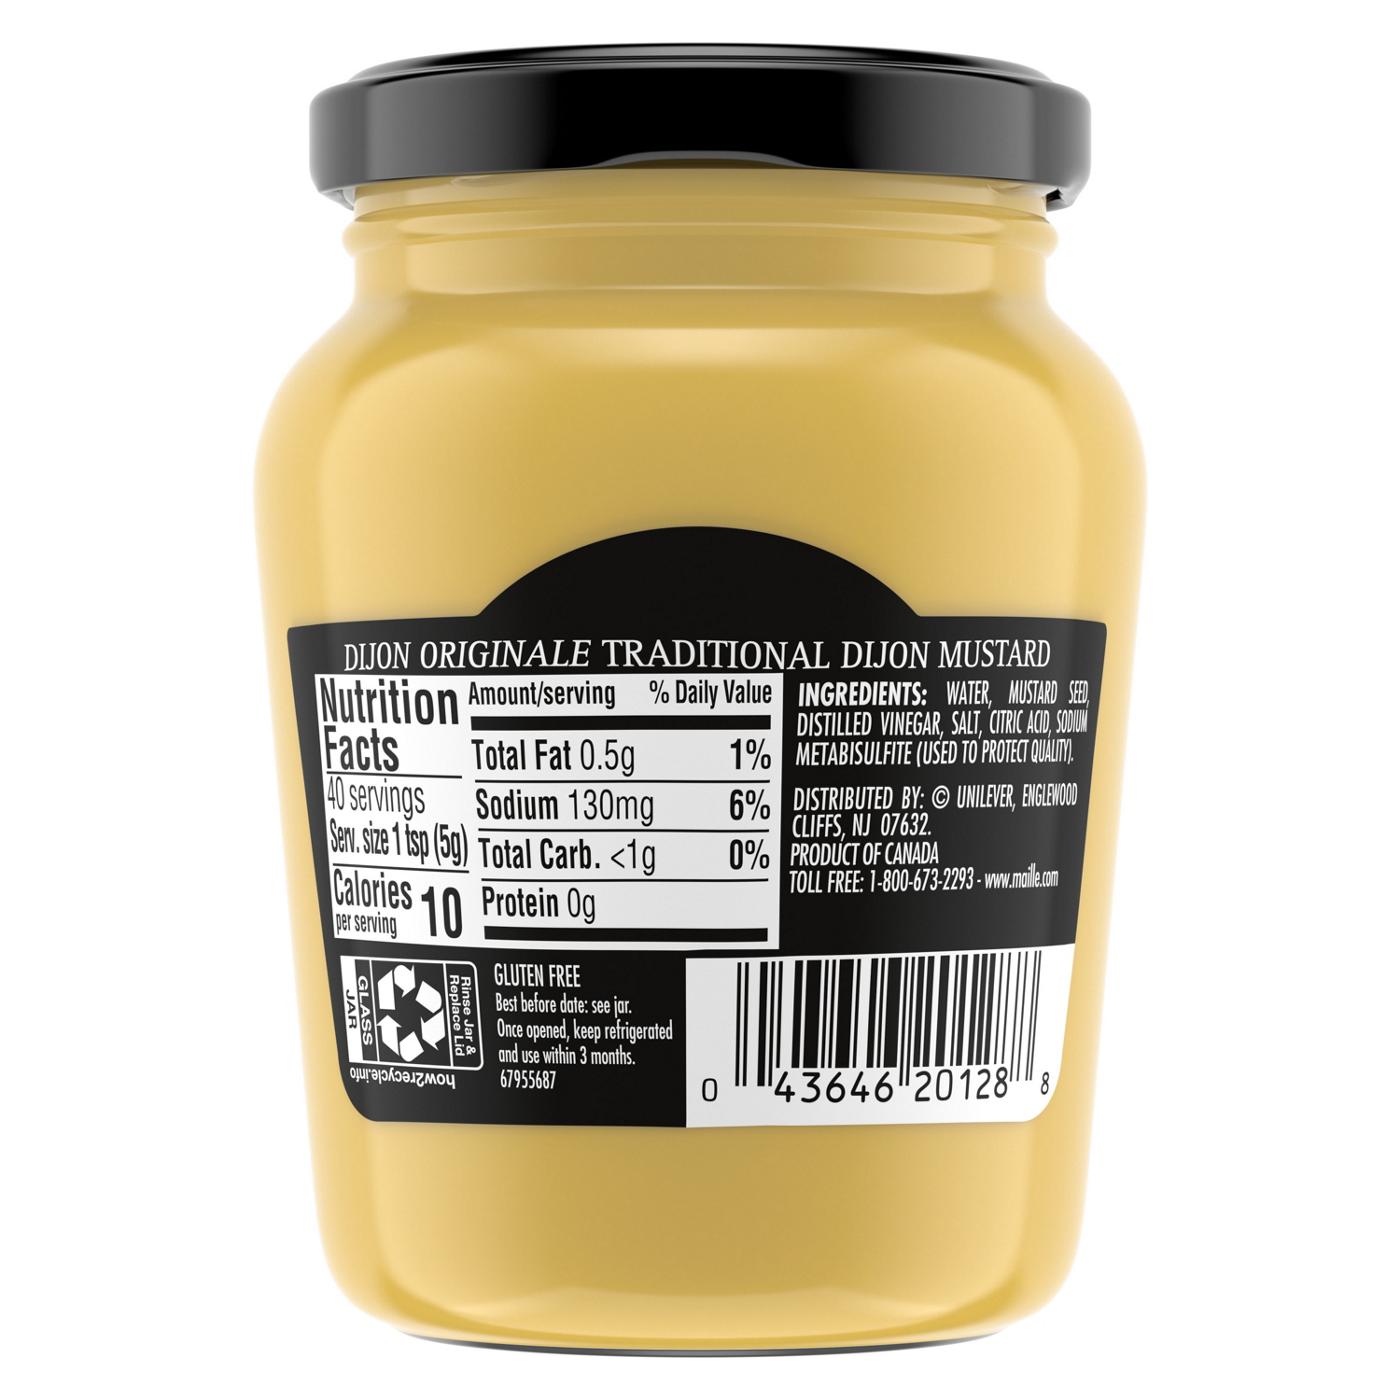 Maille Originale Traditional Dijon Mustard; image 3 of 10